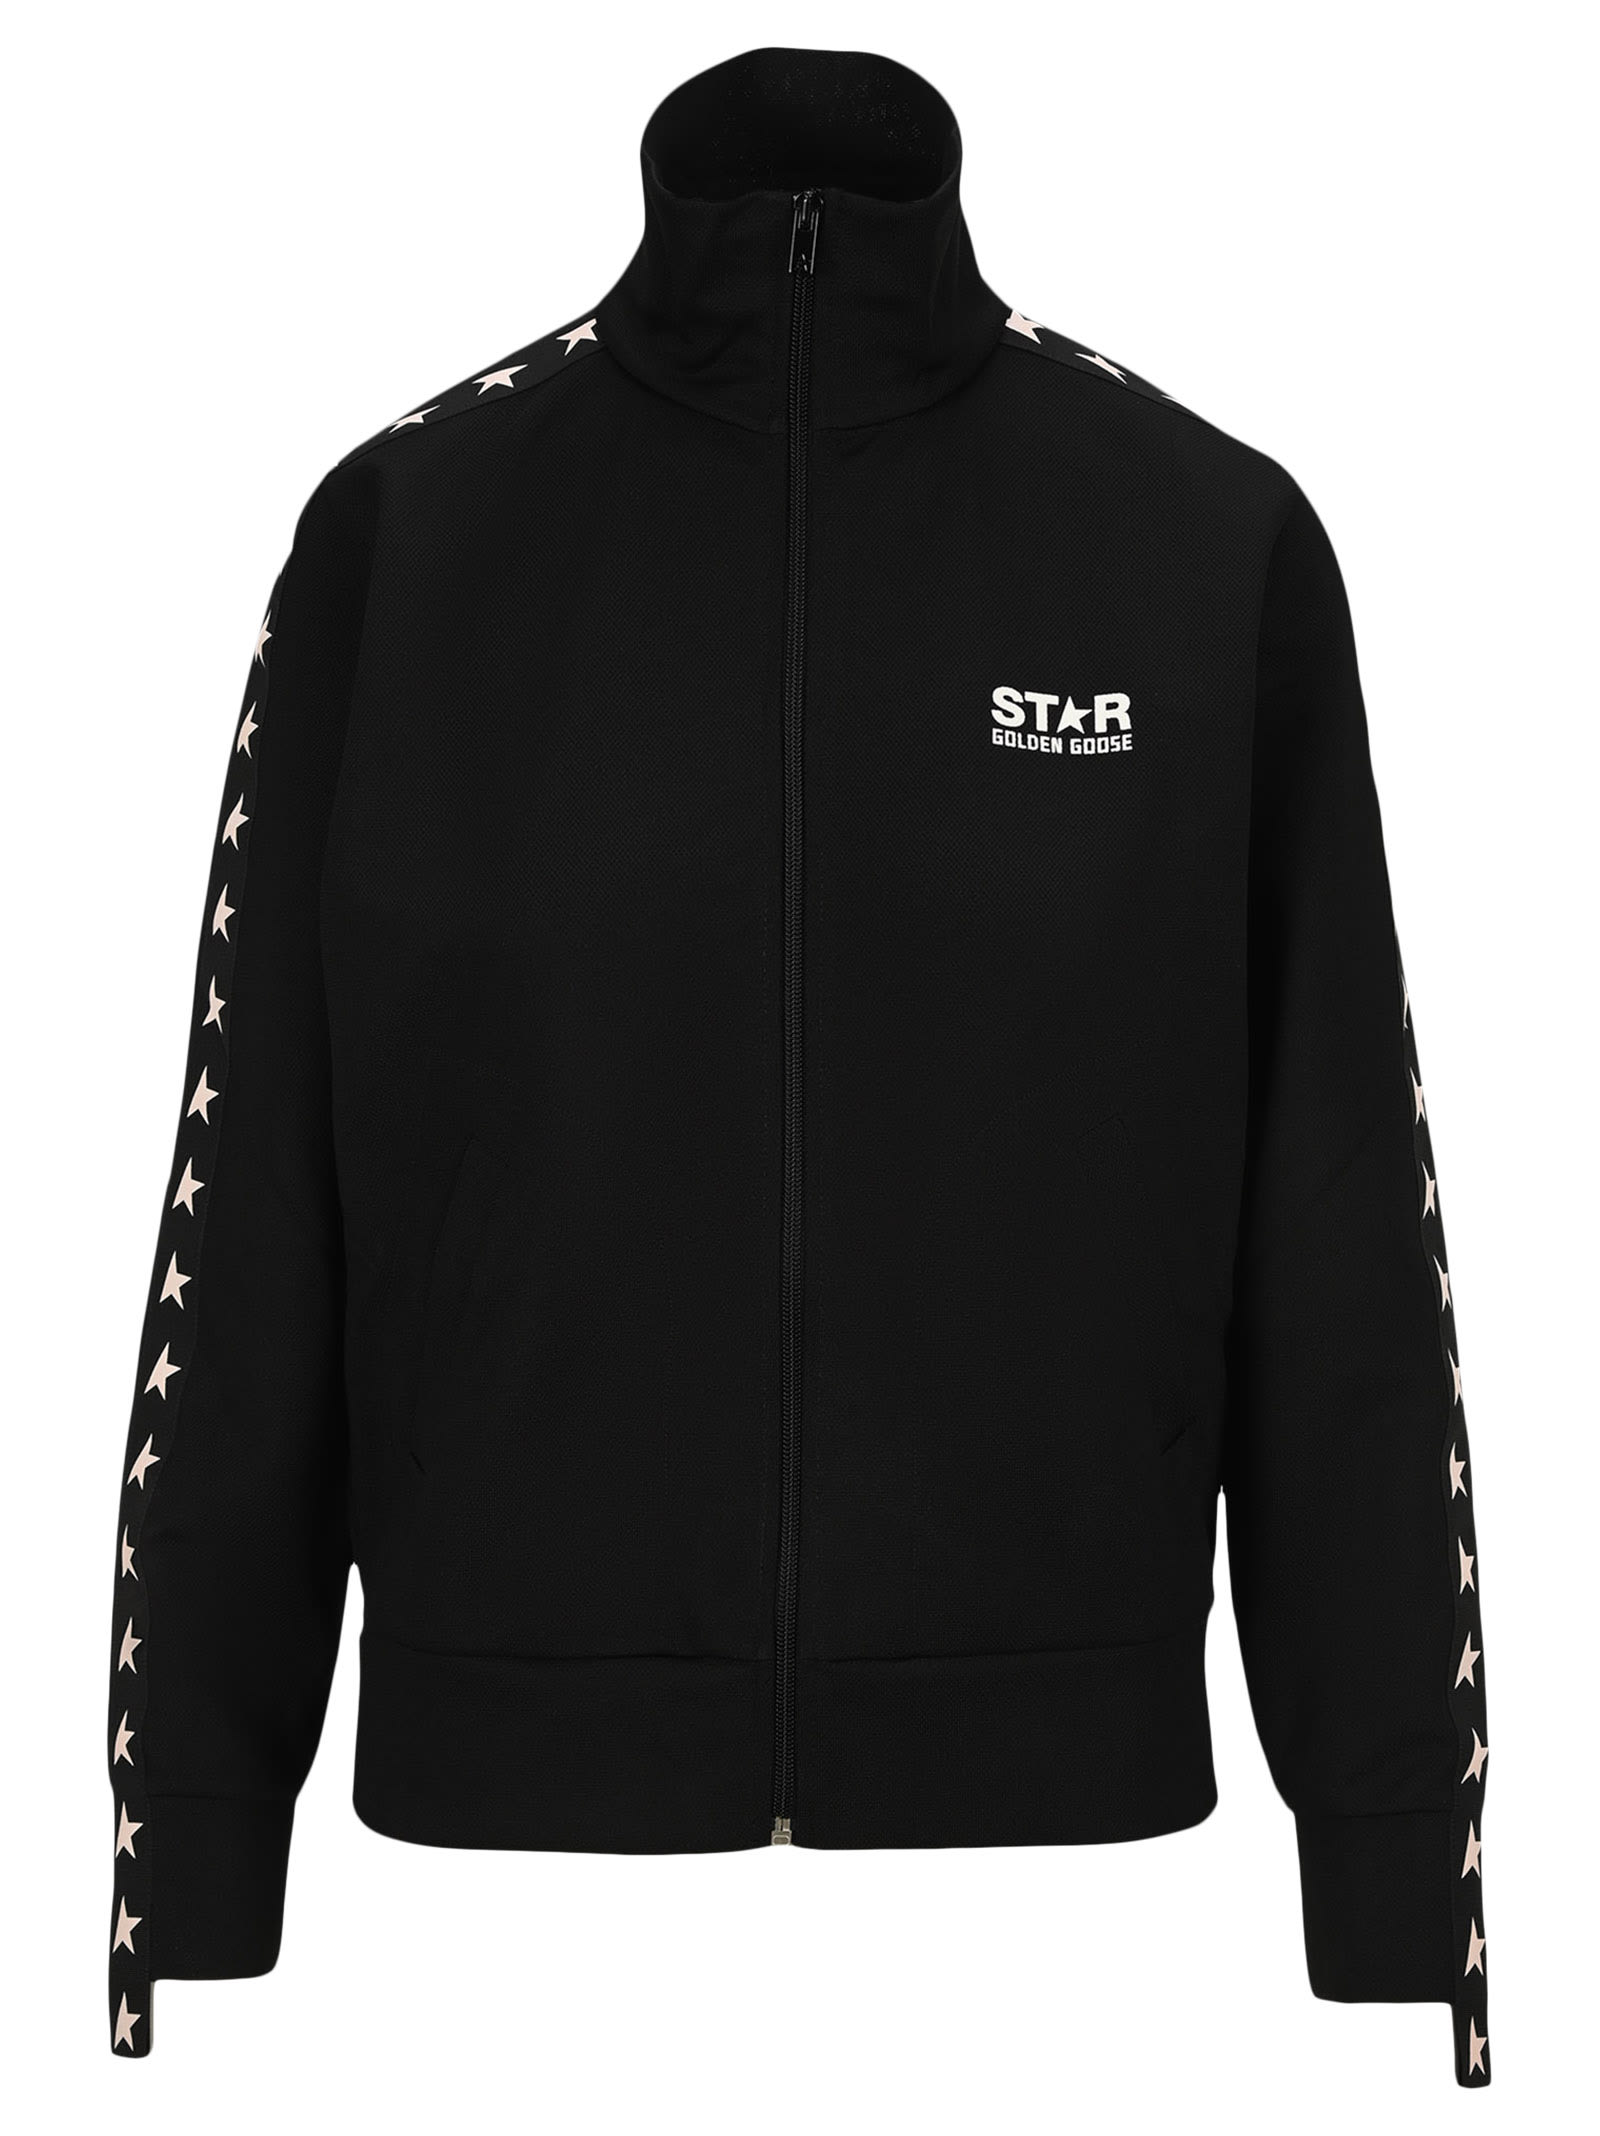 Golden Goose Black Denise Star Collection Zipped Sweatshirt With Contrasting White Stars